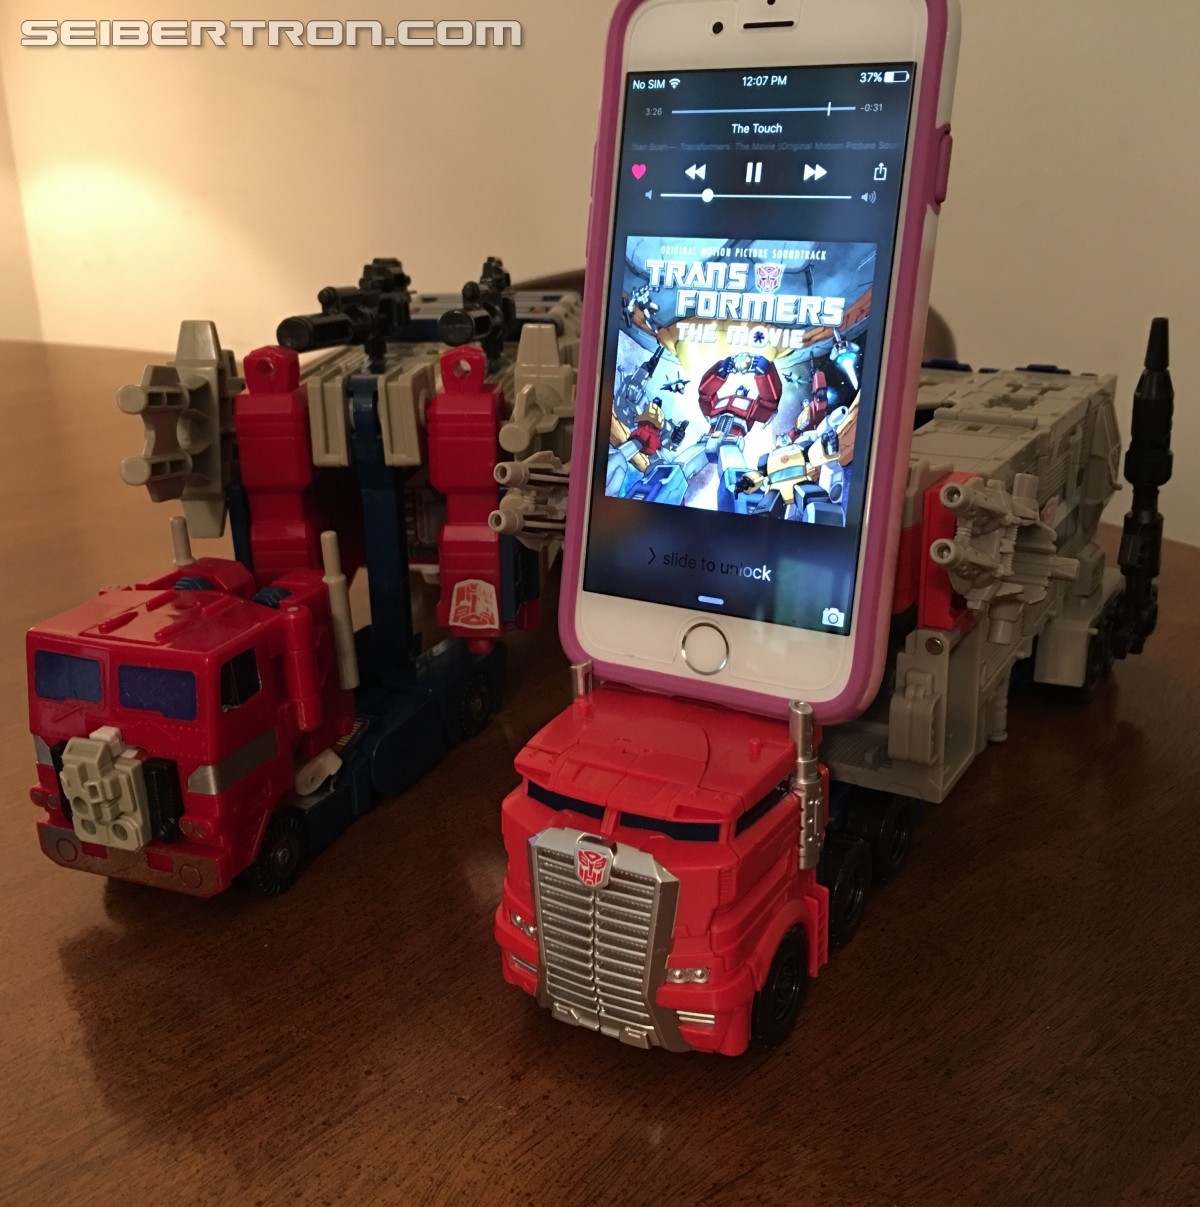 Transformers News: Seibertron User Review - Titans Returning And Such! - Powermaster Optimus Prime